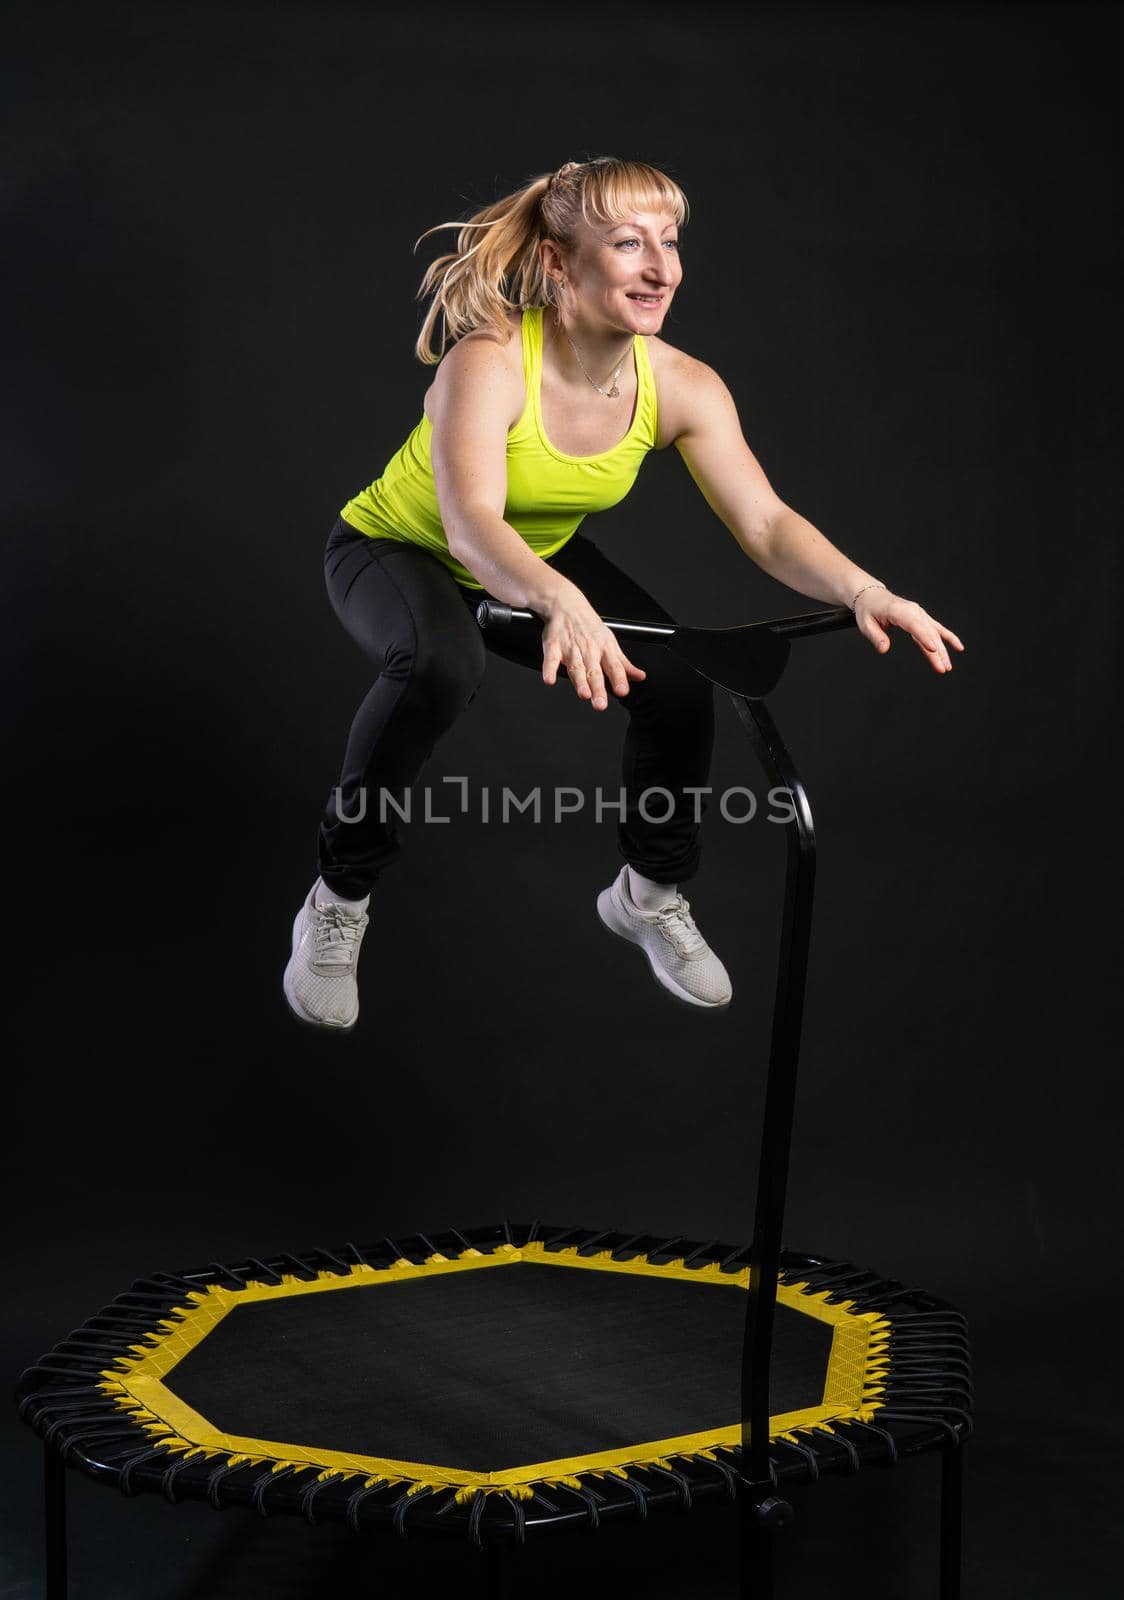 Girl on a fitness trampoline on a black background in a yellow t-shirt gym sport, equipment girl leap, cute elastic muscle instructor enjoy